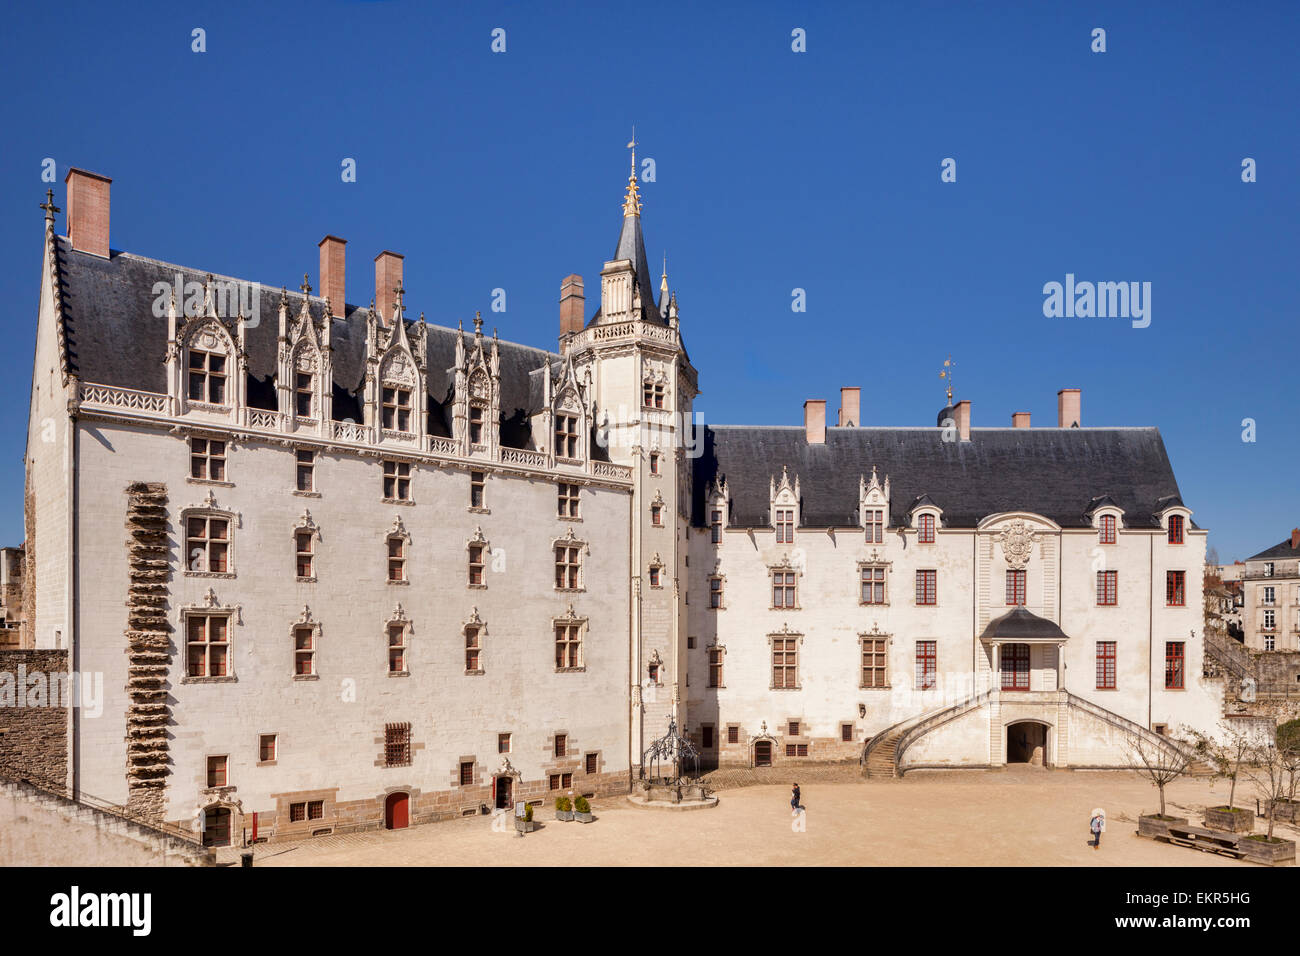 Chateau of the Dukes of Brittany, Nantes, Loire Atlantique, France. Stock Photo